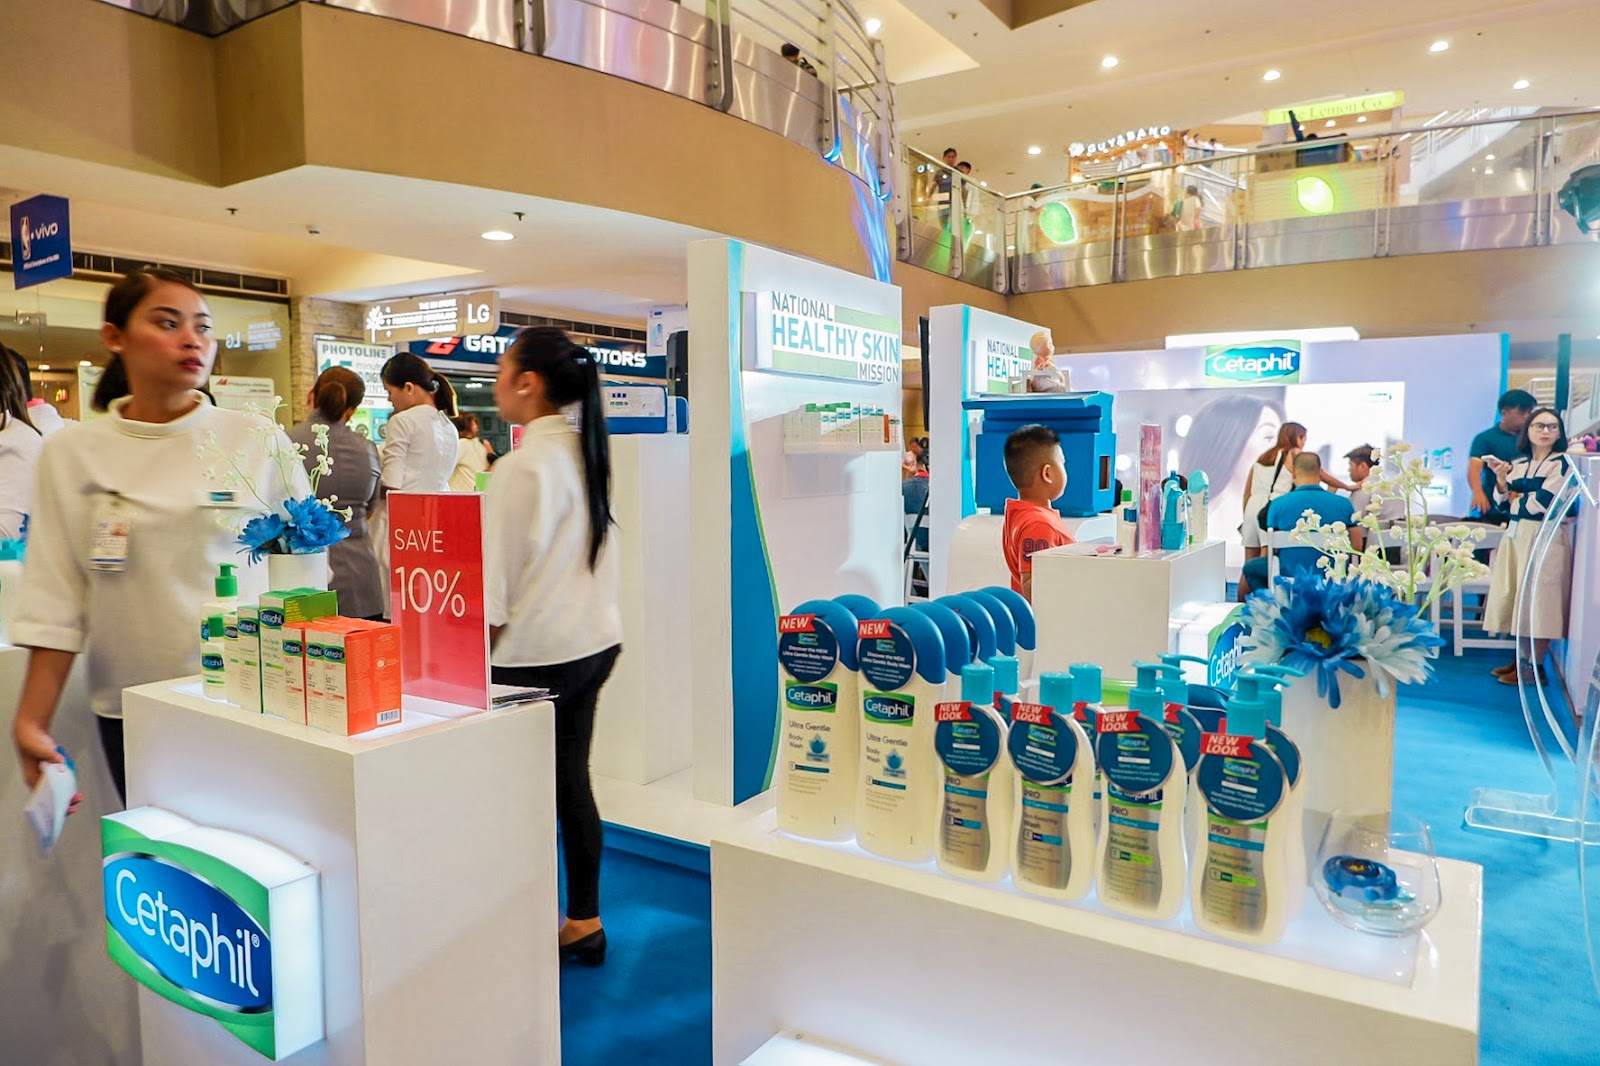 Cetaphil National Healthy Skin Mission: Skin Care is Self Care